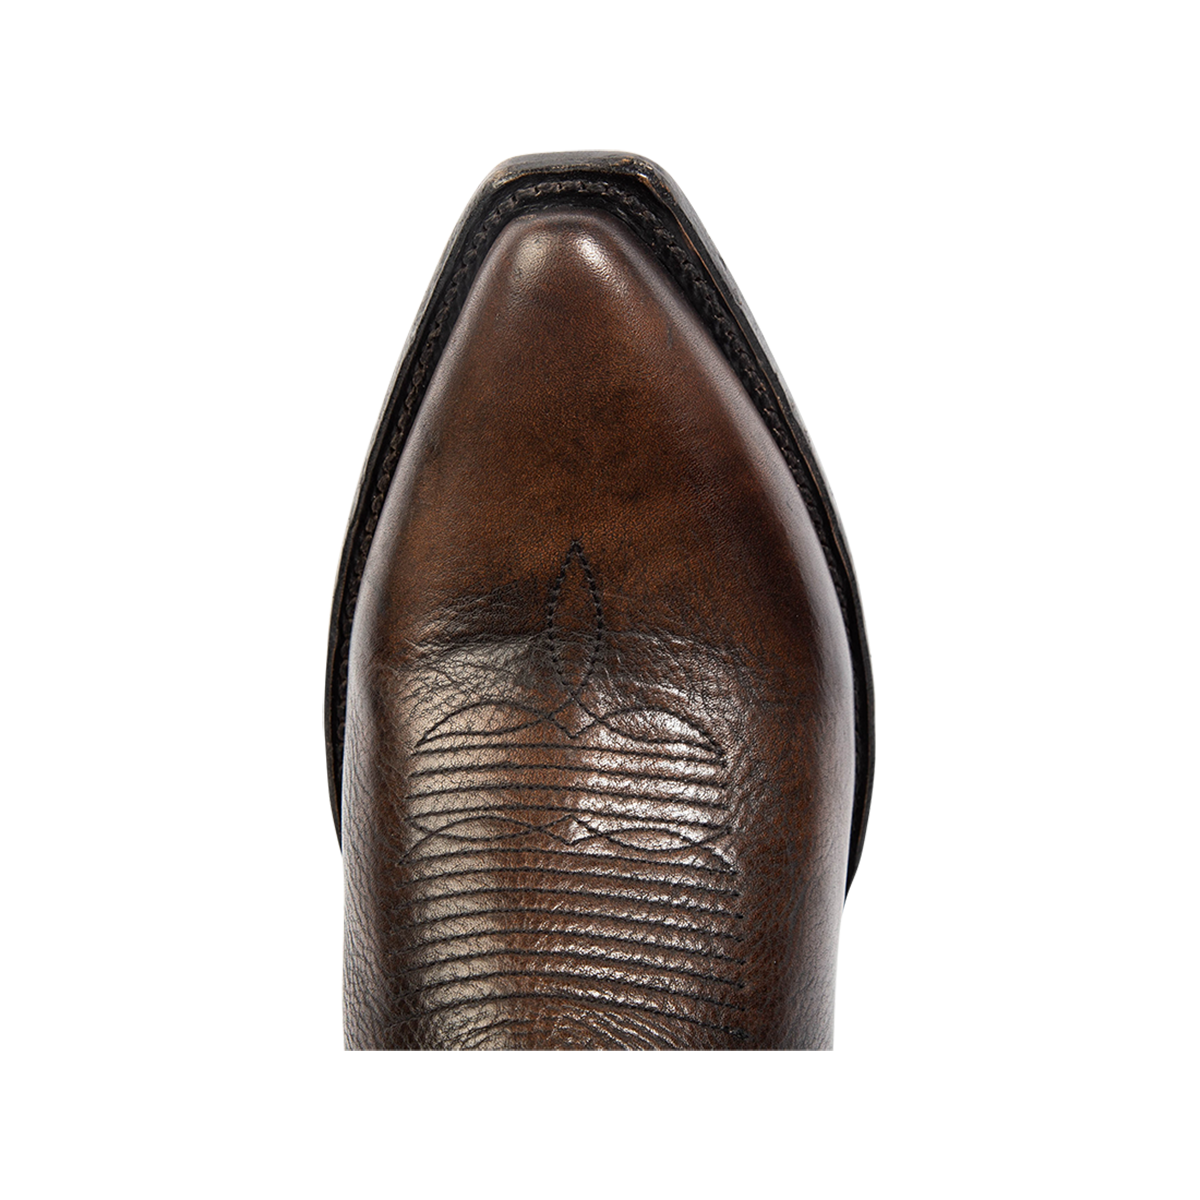 Top view showing snip toe construction and stitch detailing on FREEBIRD men's Marshall black distressed leather western cowboy boot